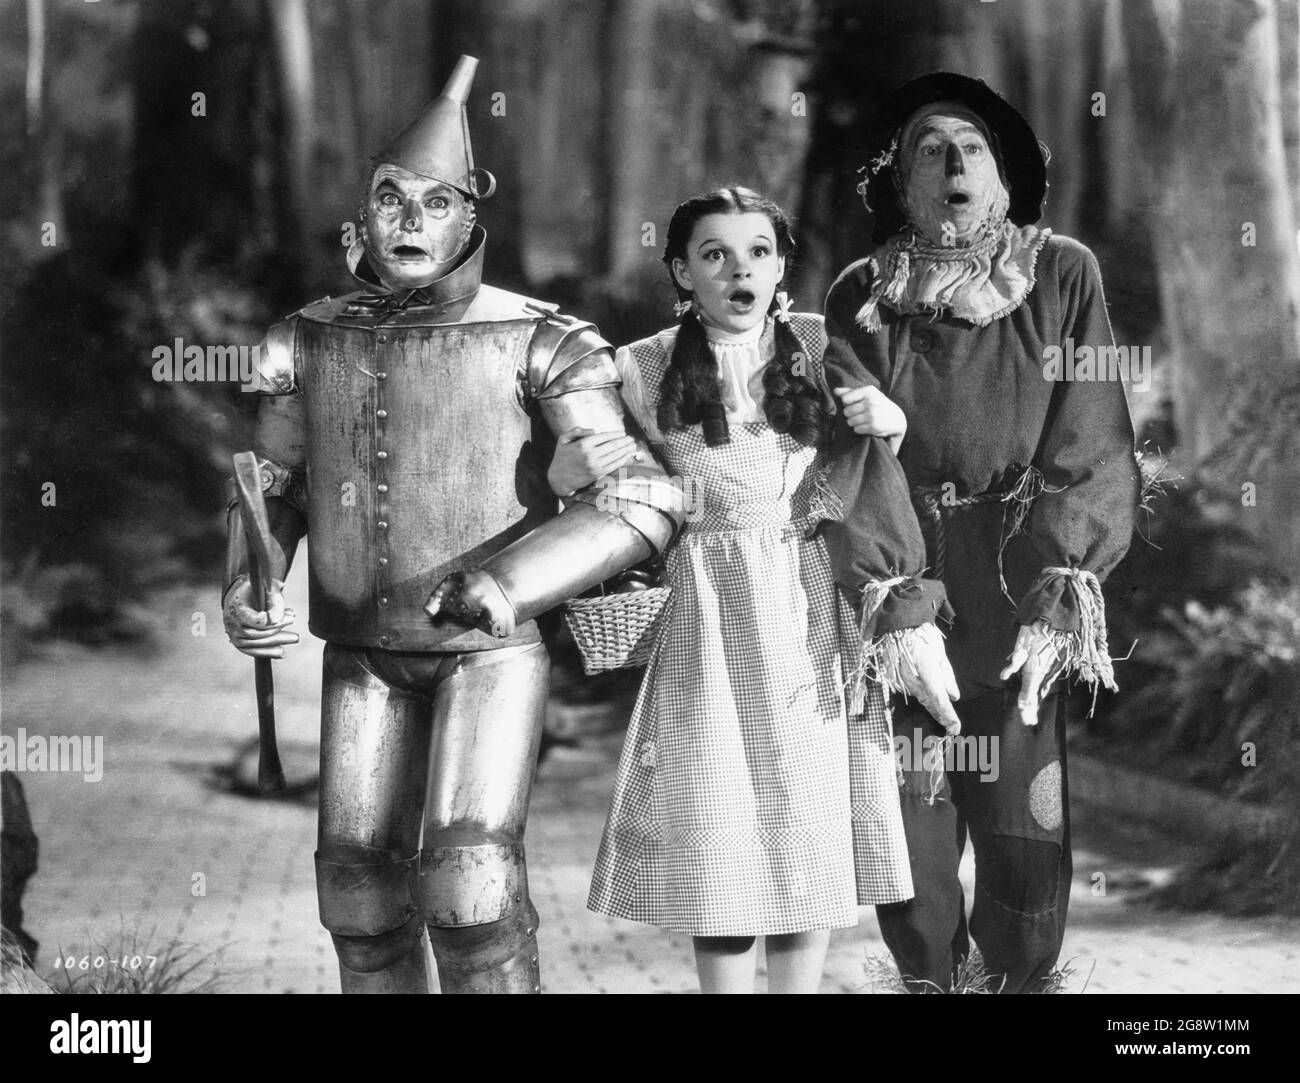 JACK HALEY as Tin Man JUDY GARLAND as Dorothy Gale and RAY BOLGER as Scarecrow in THE WIZARD OF OZ 1939 director VICTOR FLEMING novel Frank L. Baum costumes Gilbert Adrian Metro Goldwyn Mayer Stock Photo